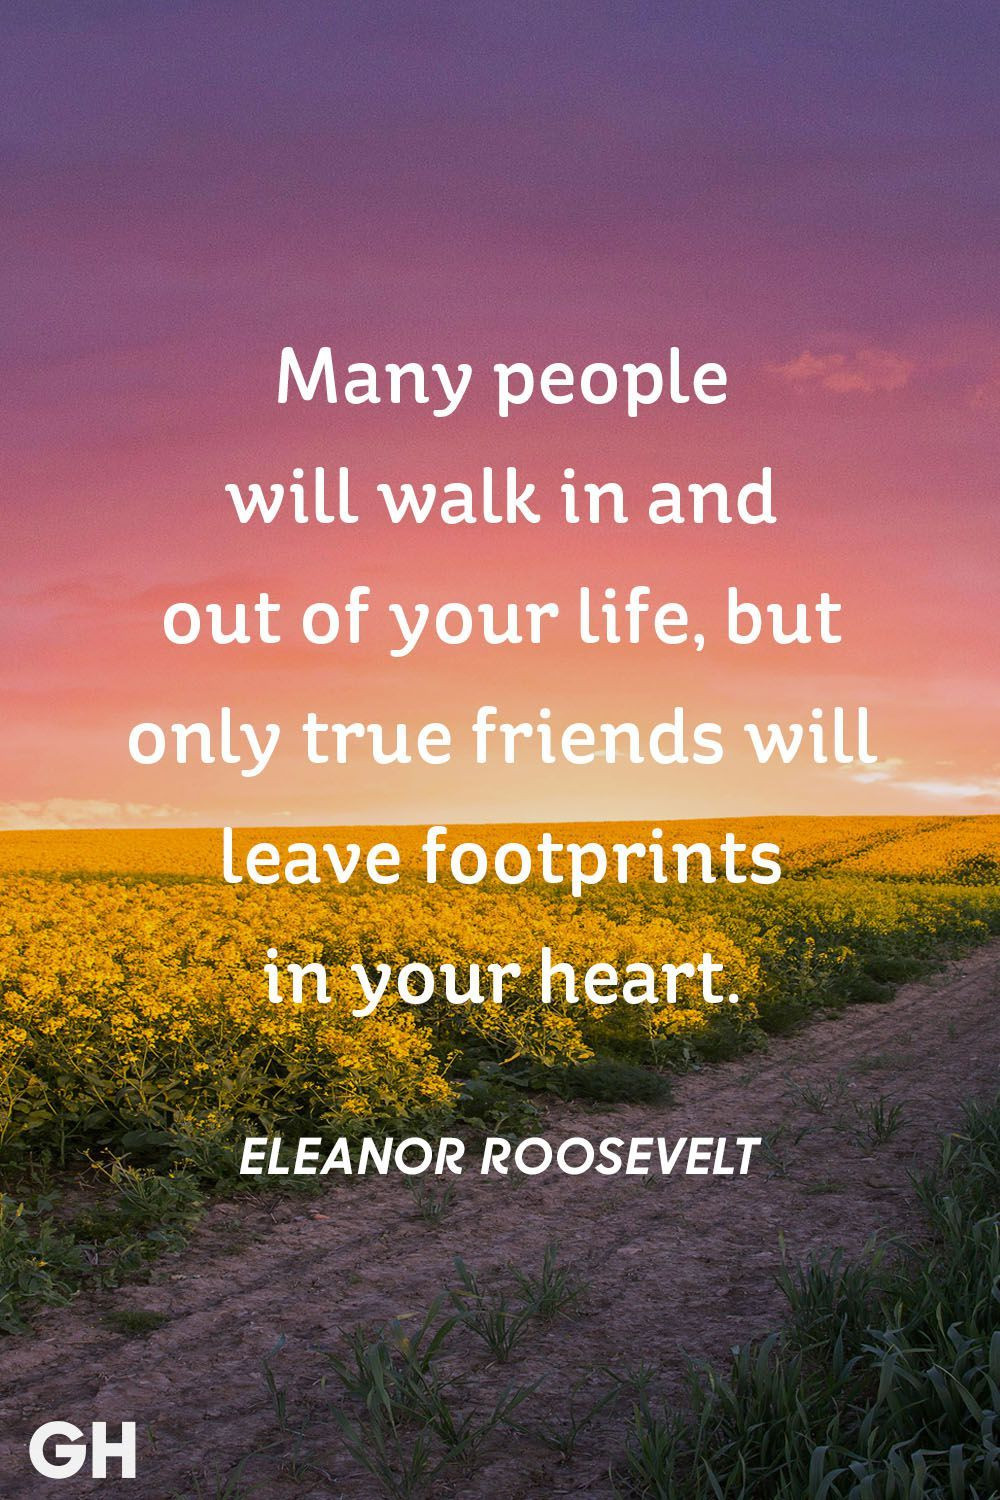 Friendship Lie Quotes
 40 Friendship Quotes to With Your Besties